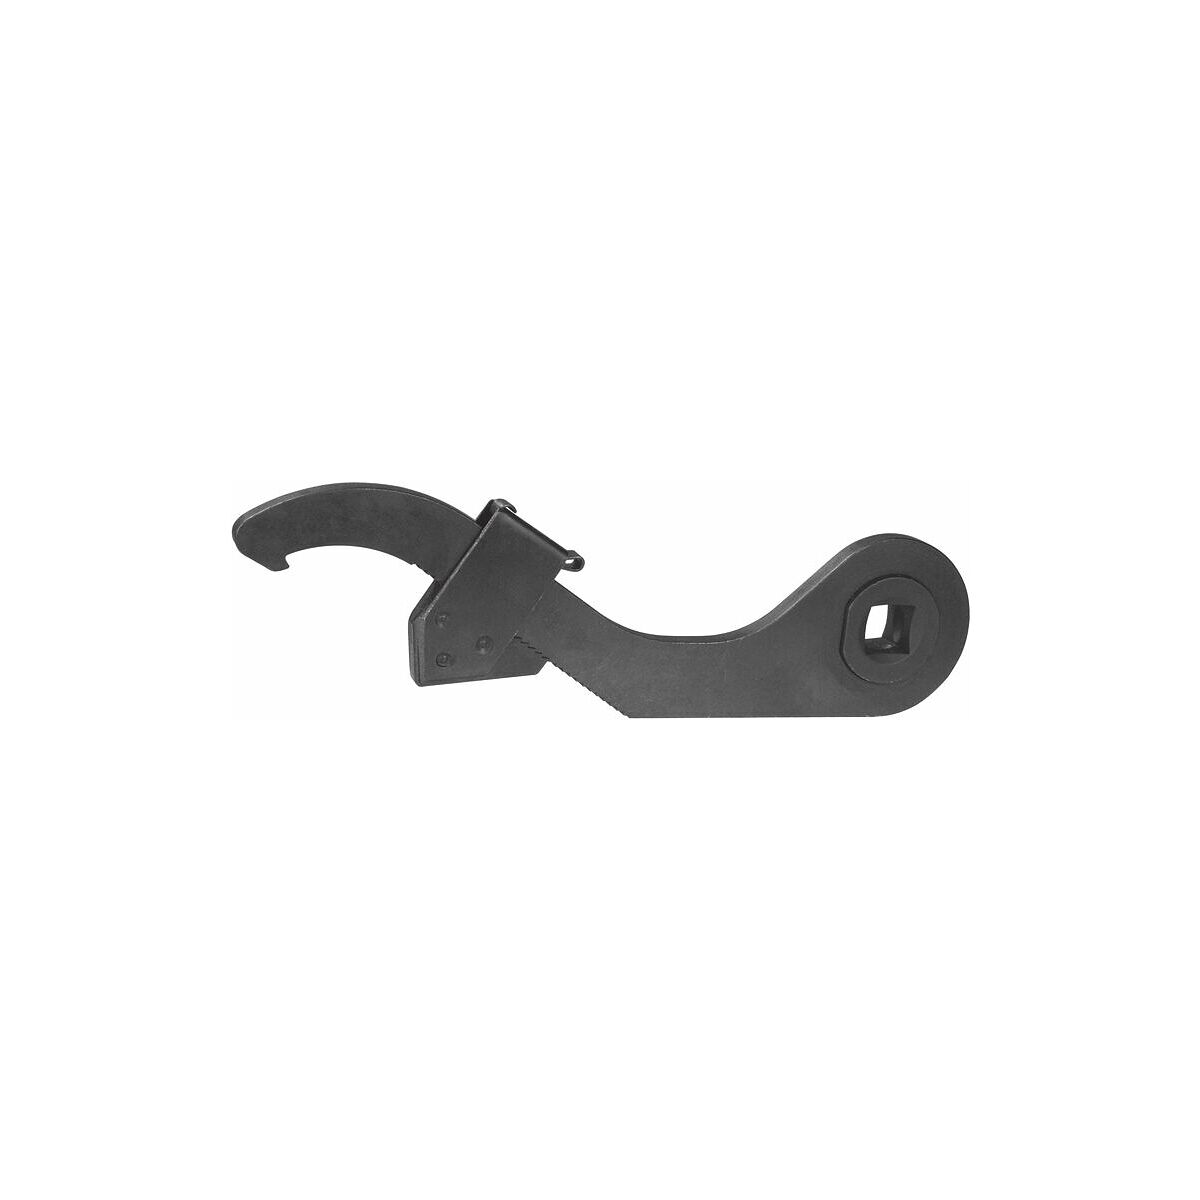 Simply buy Adjustable C-hook spanner, for torque wrench with